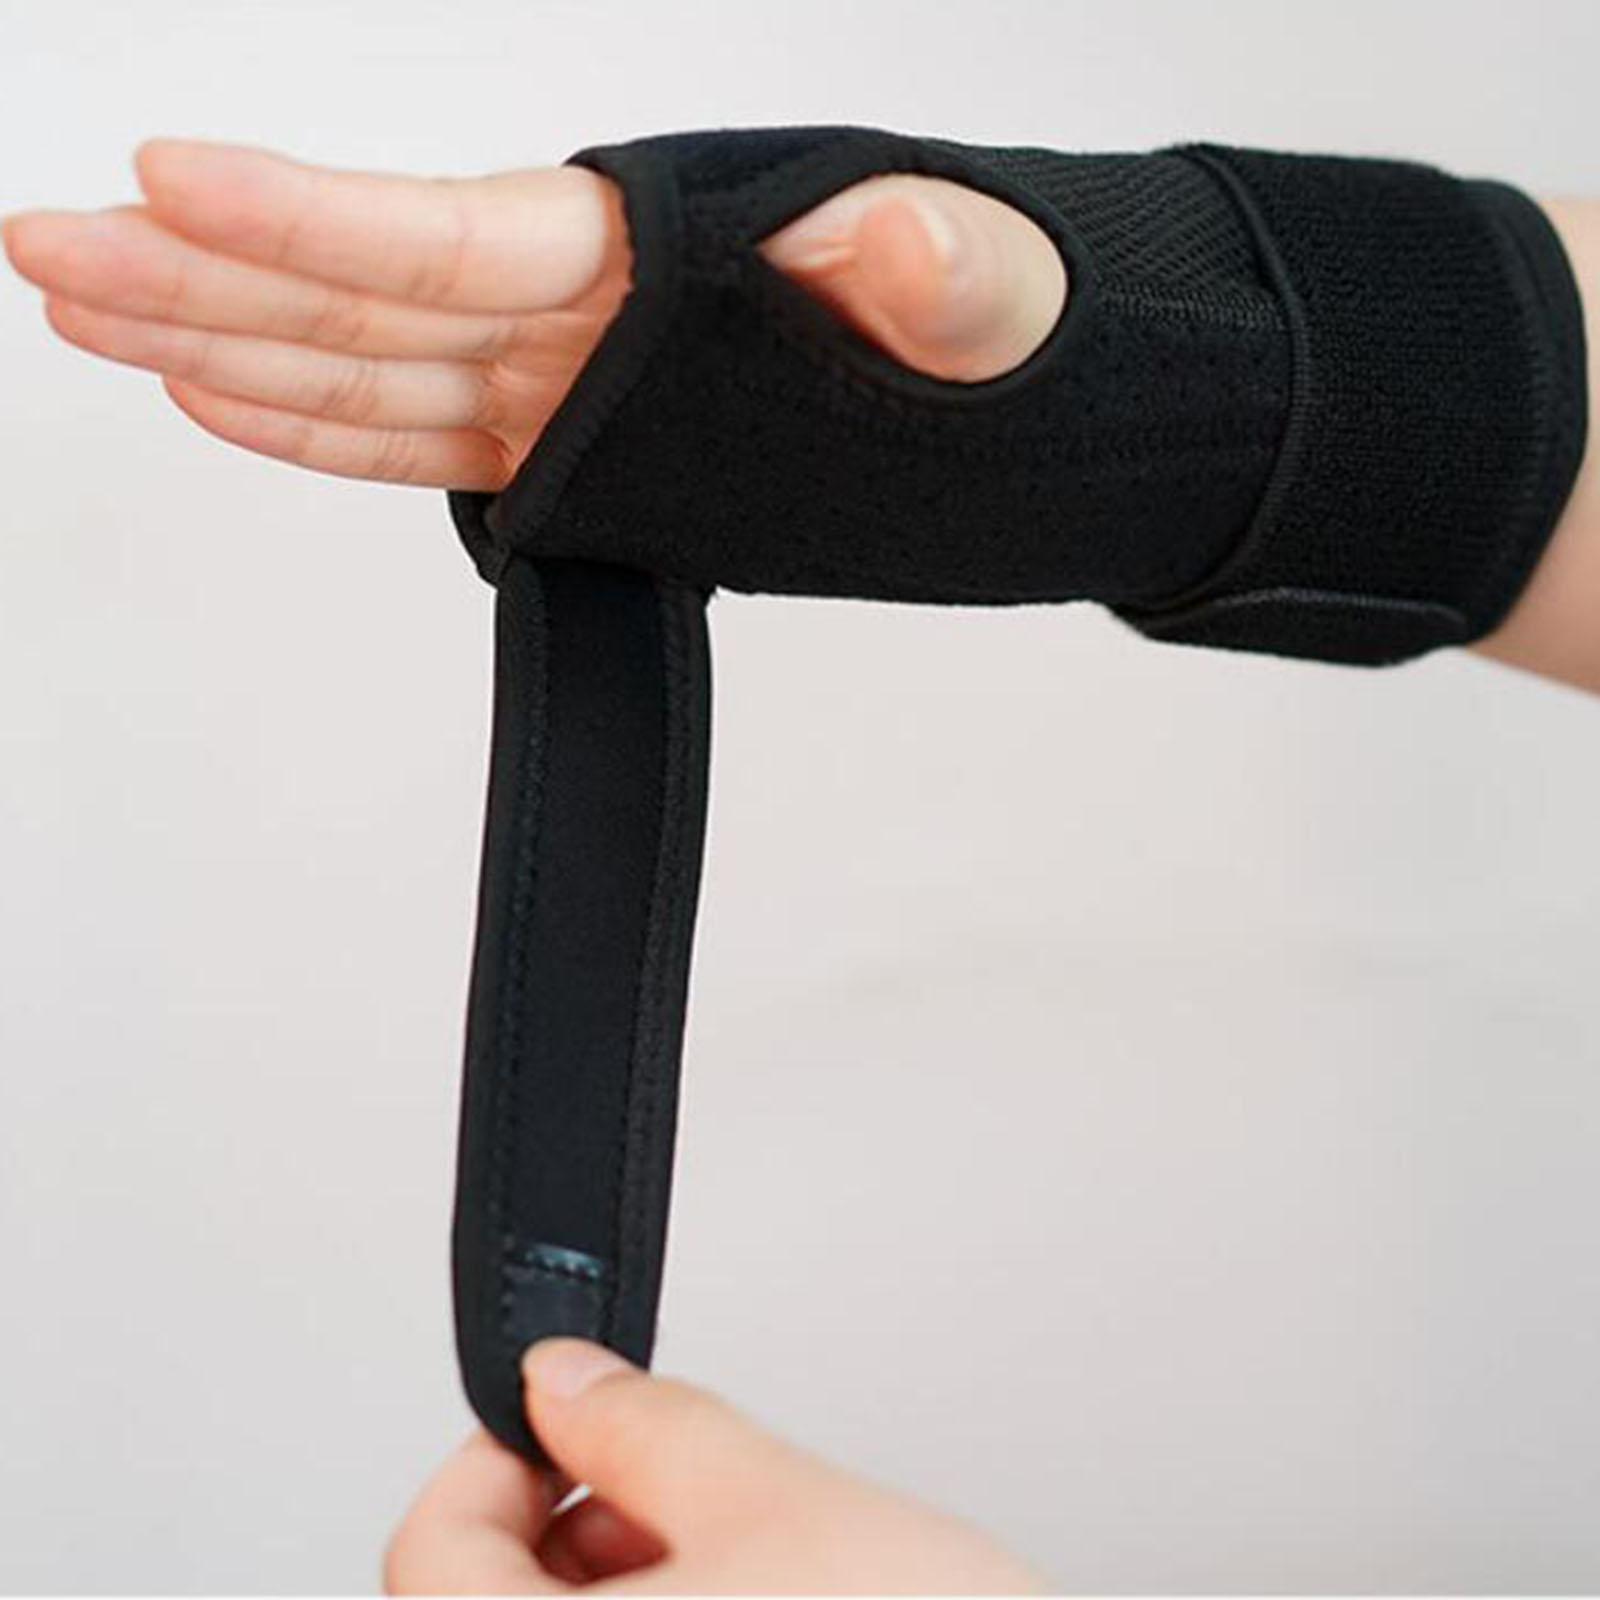 Wrist Support Injury Recovery Brace for Sport Injuries Training L Right hand